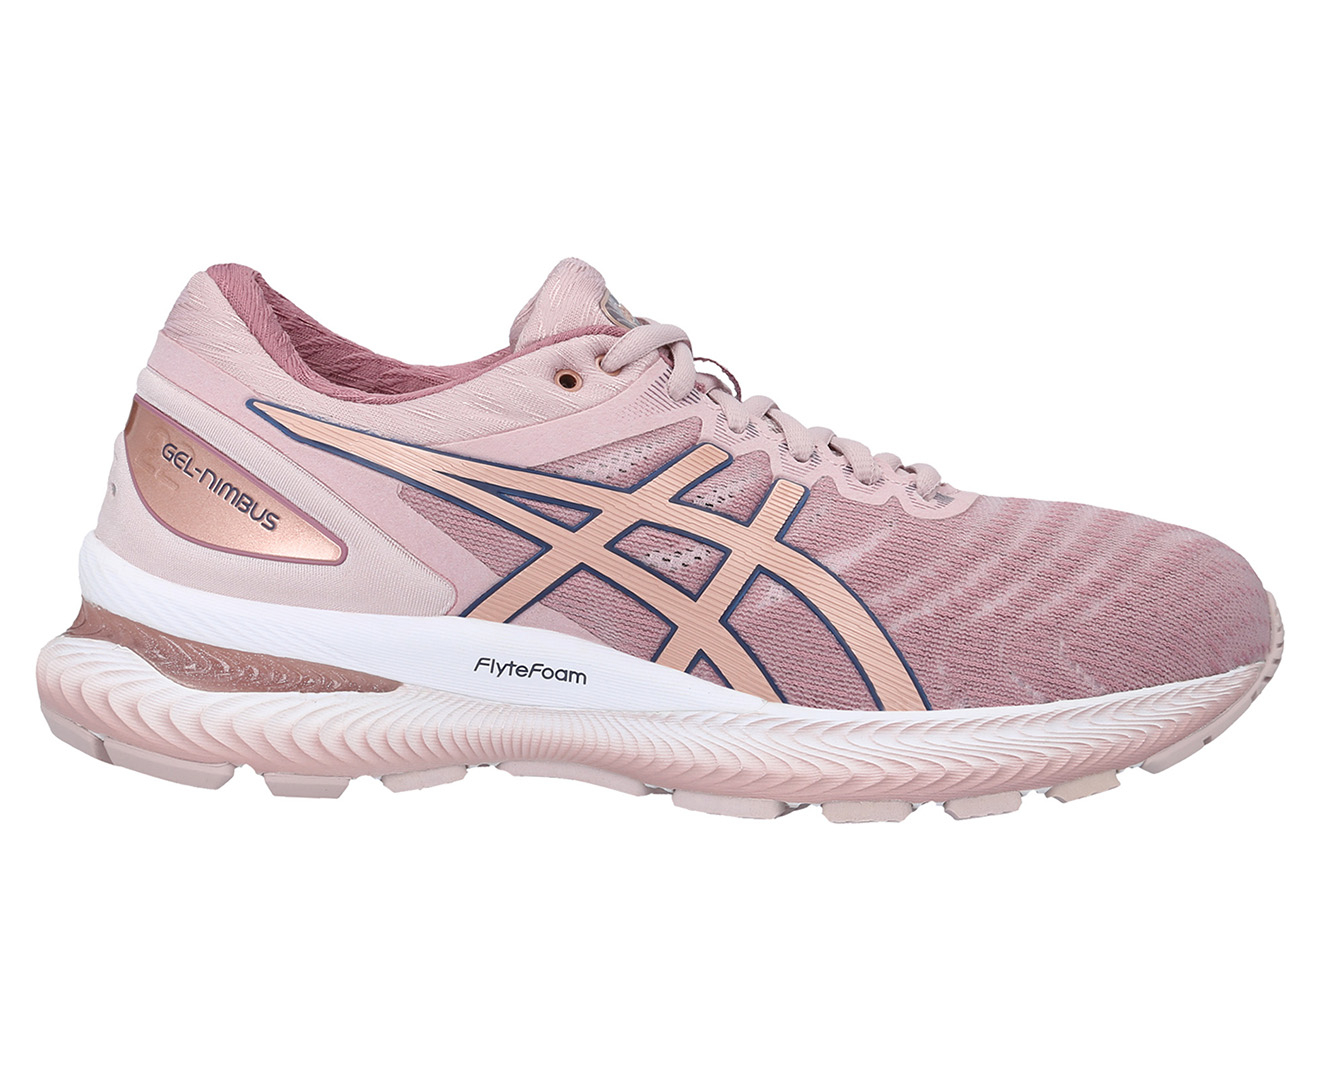 catch of the day womens asics